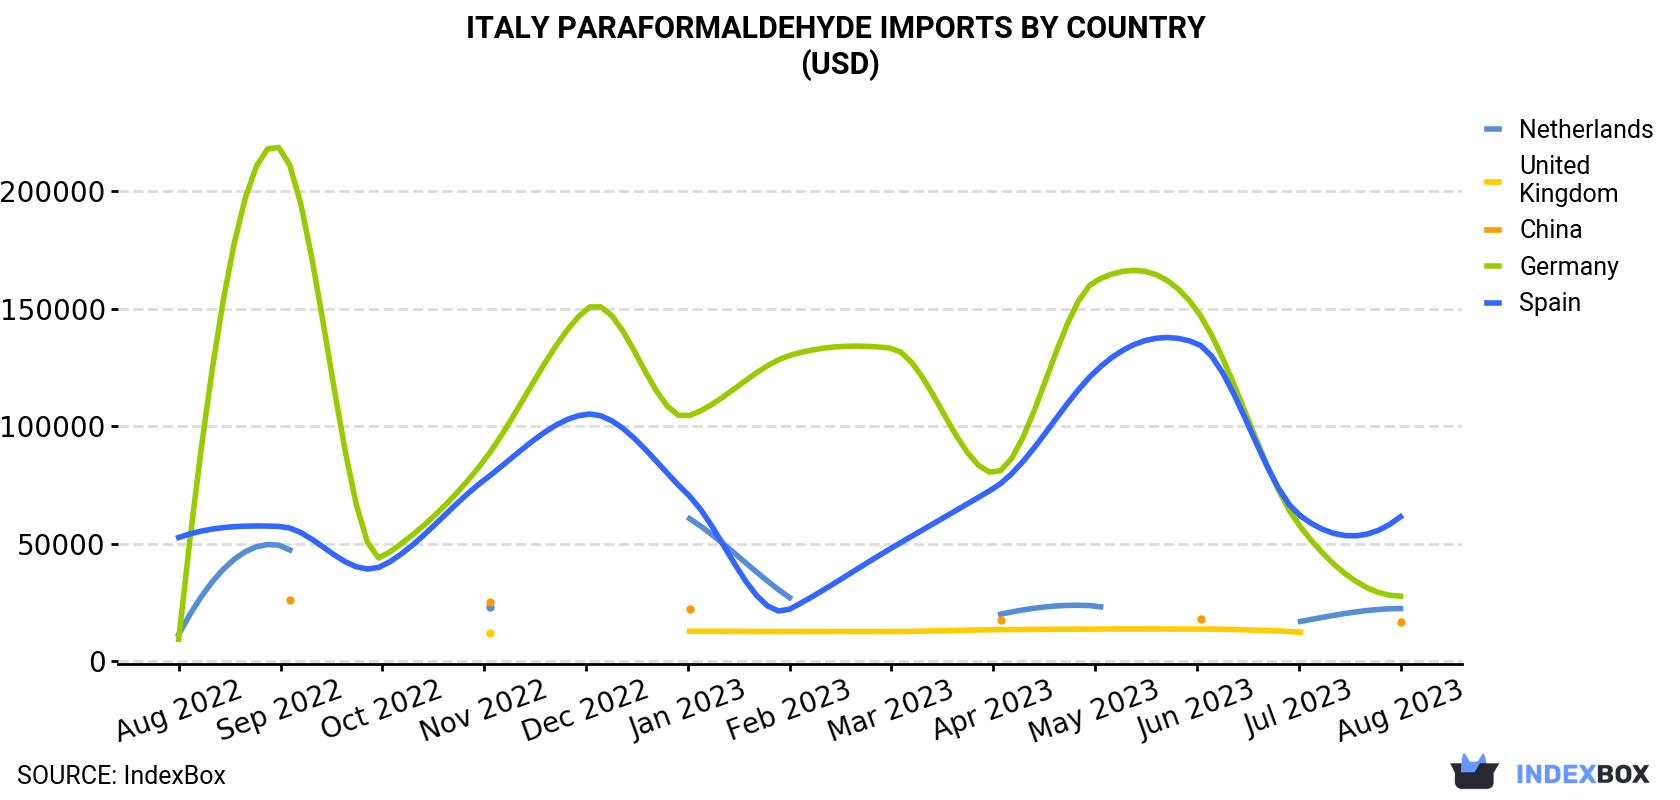 Italy Paraformaldehyde Imports By Country (USD)